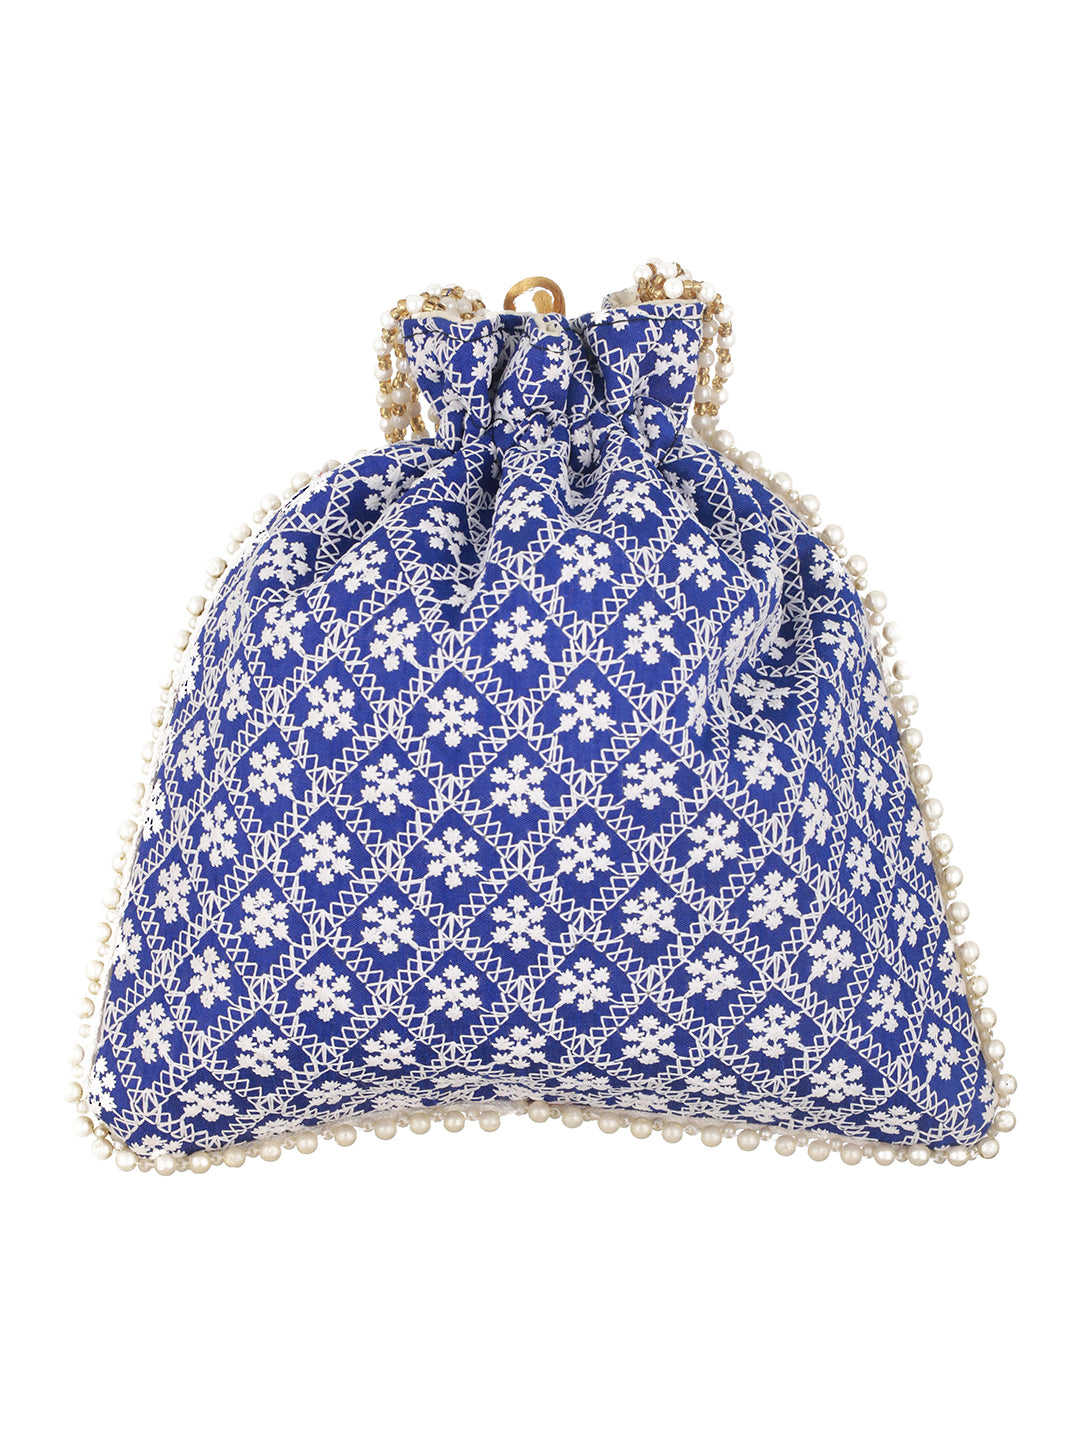 Blue & Gold-Toned Chikan Embroidered work Potli Clutch - Jazzandsizzle